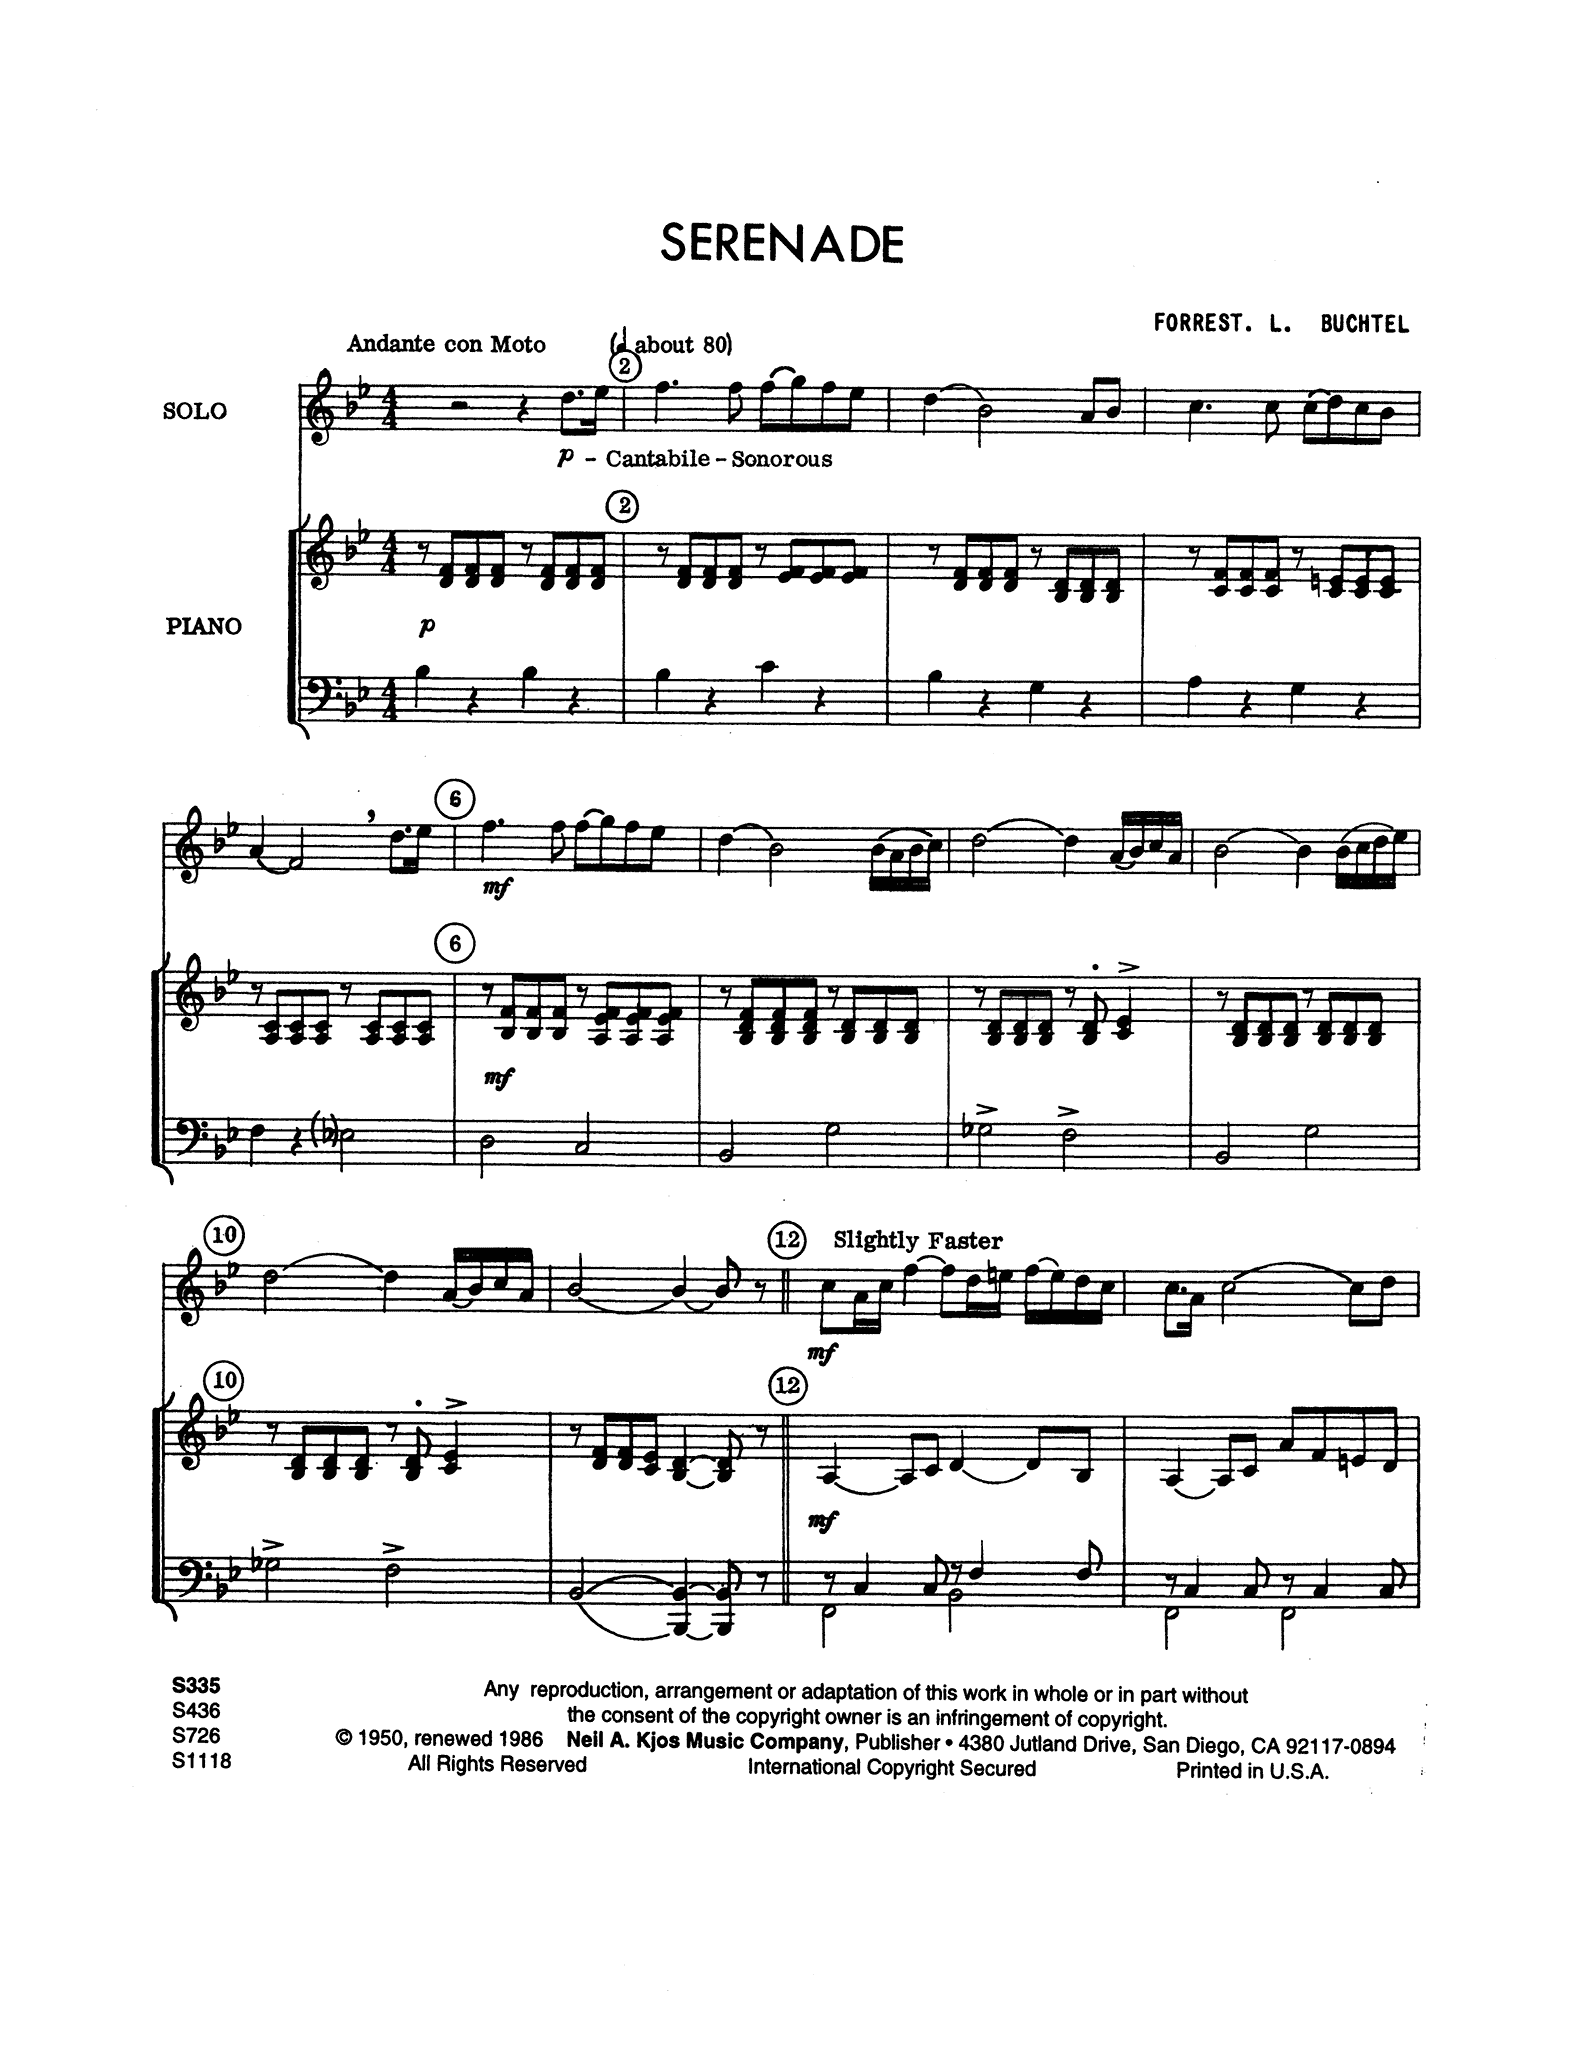 Buchtel, Forrest: Serenade for clarinet and piano score